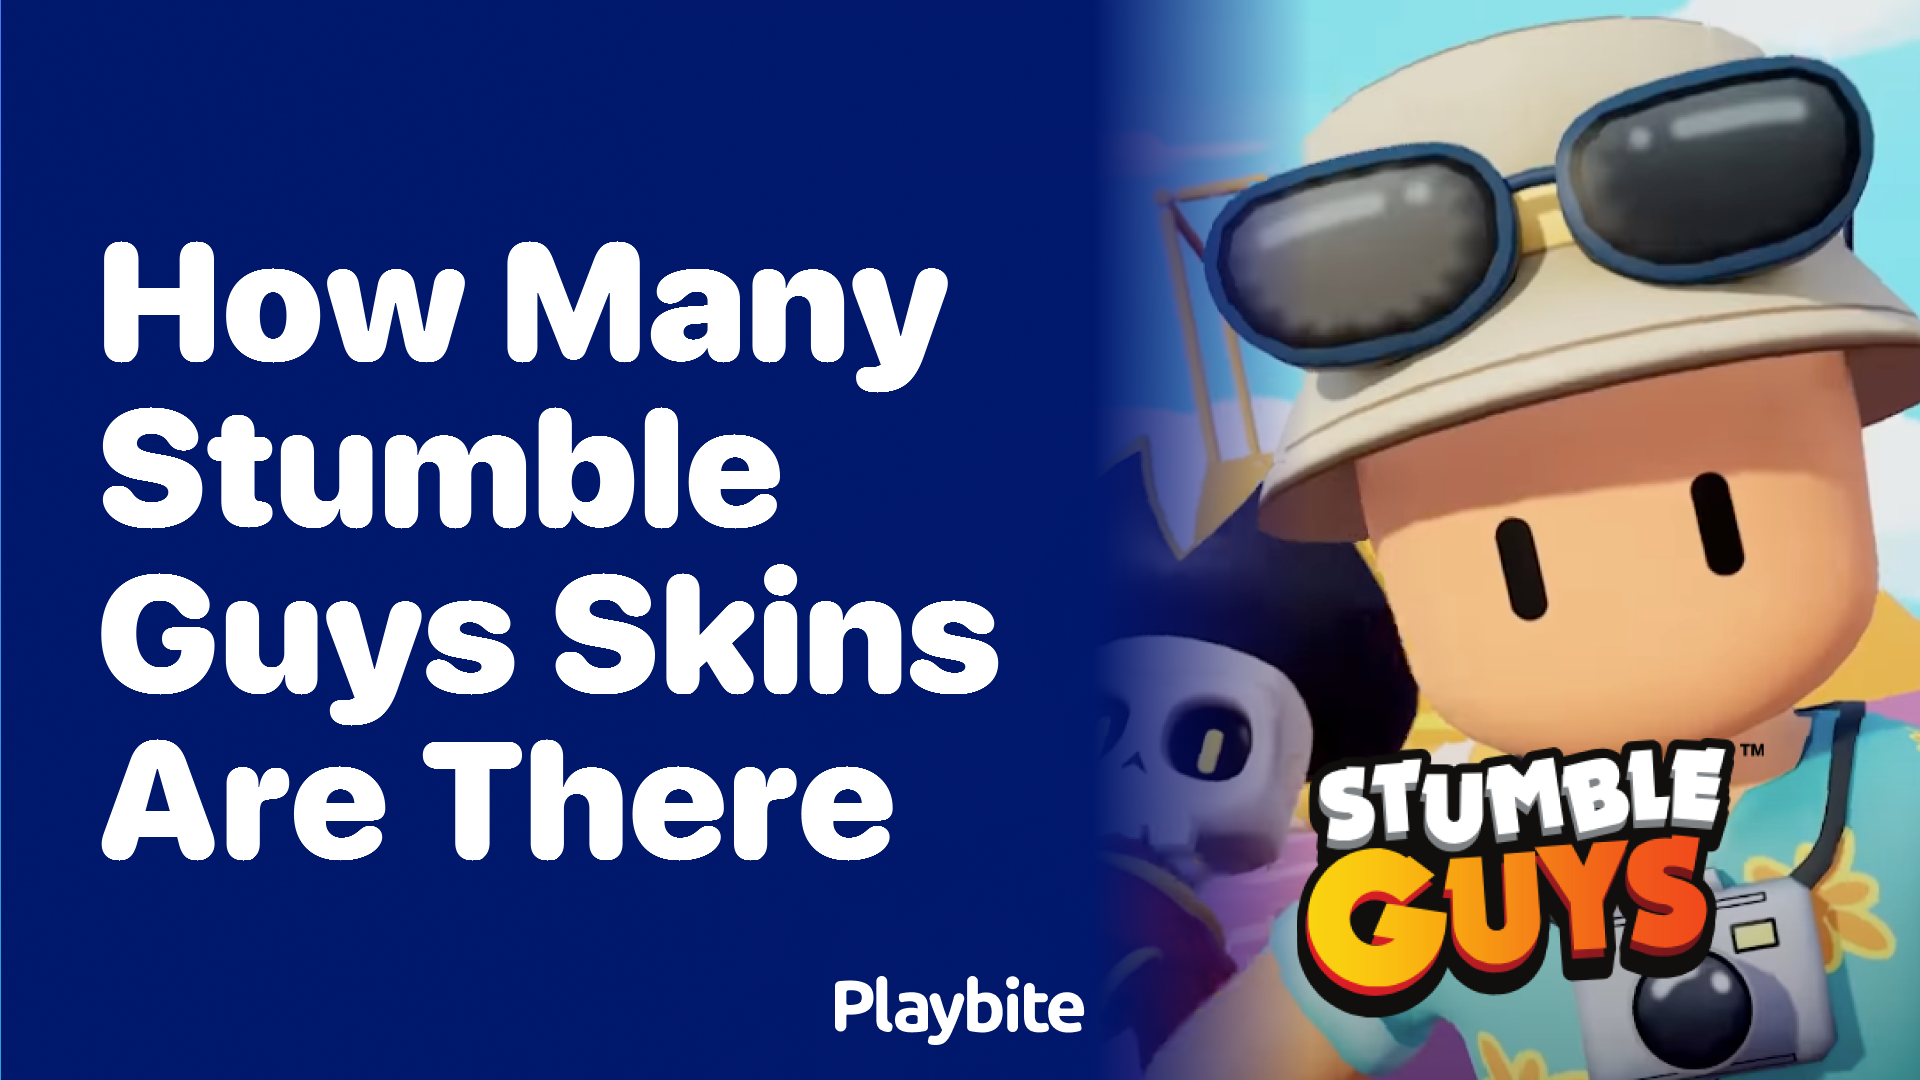 How Many Stumble Guys Skins Are There?